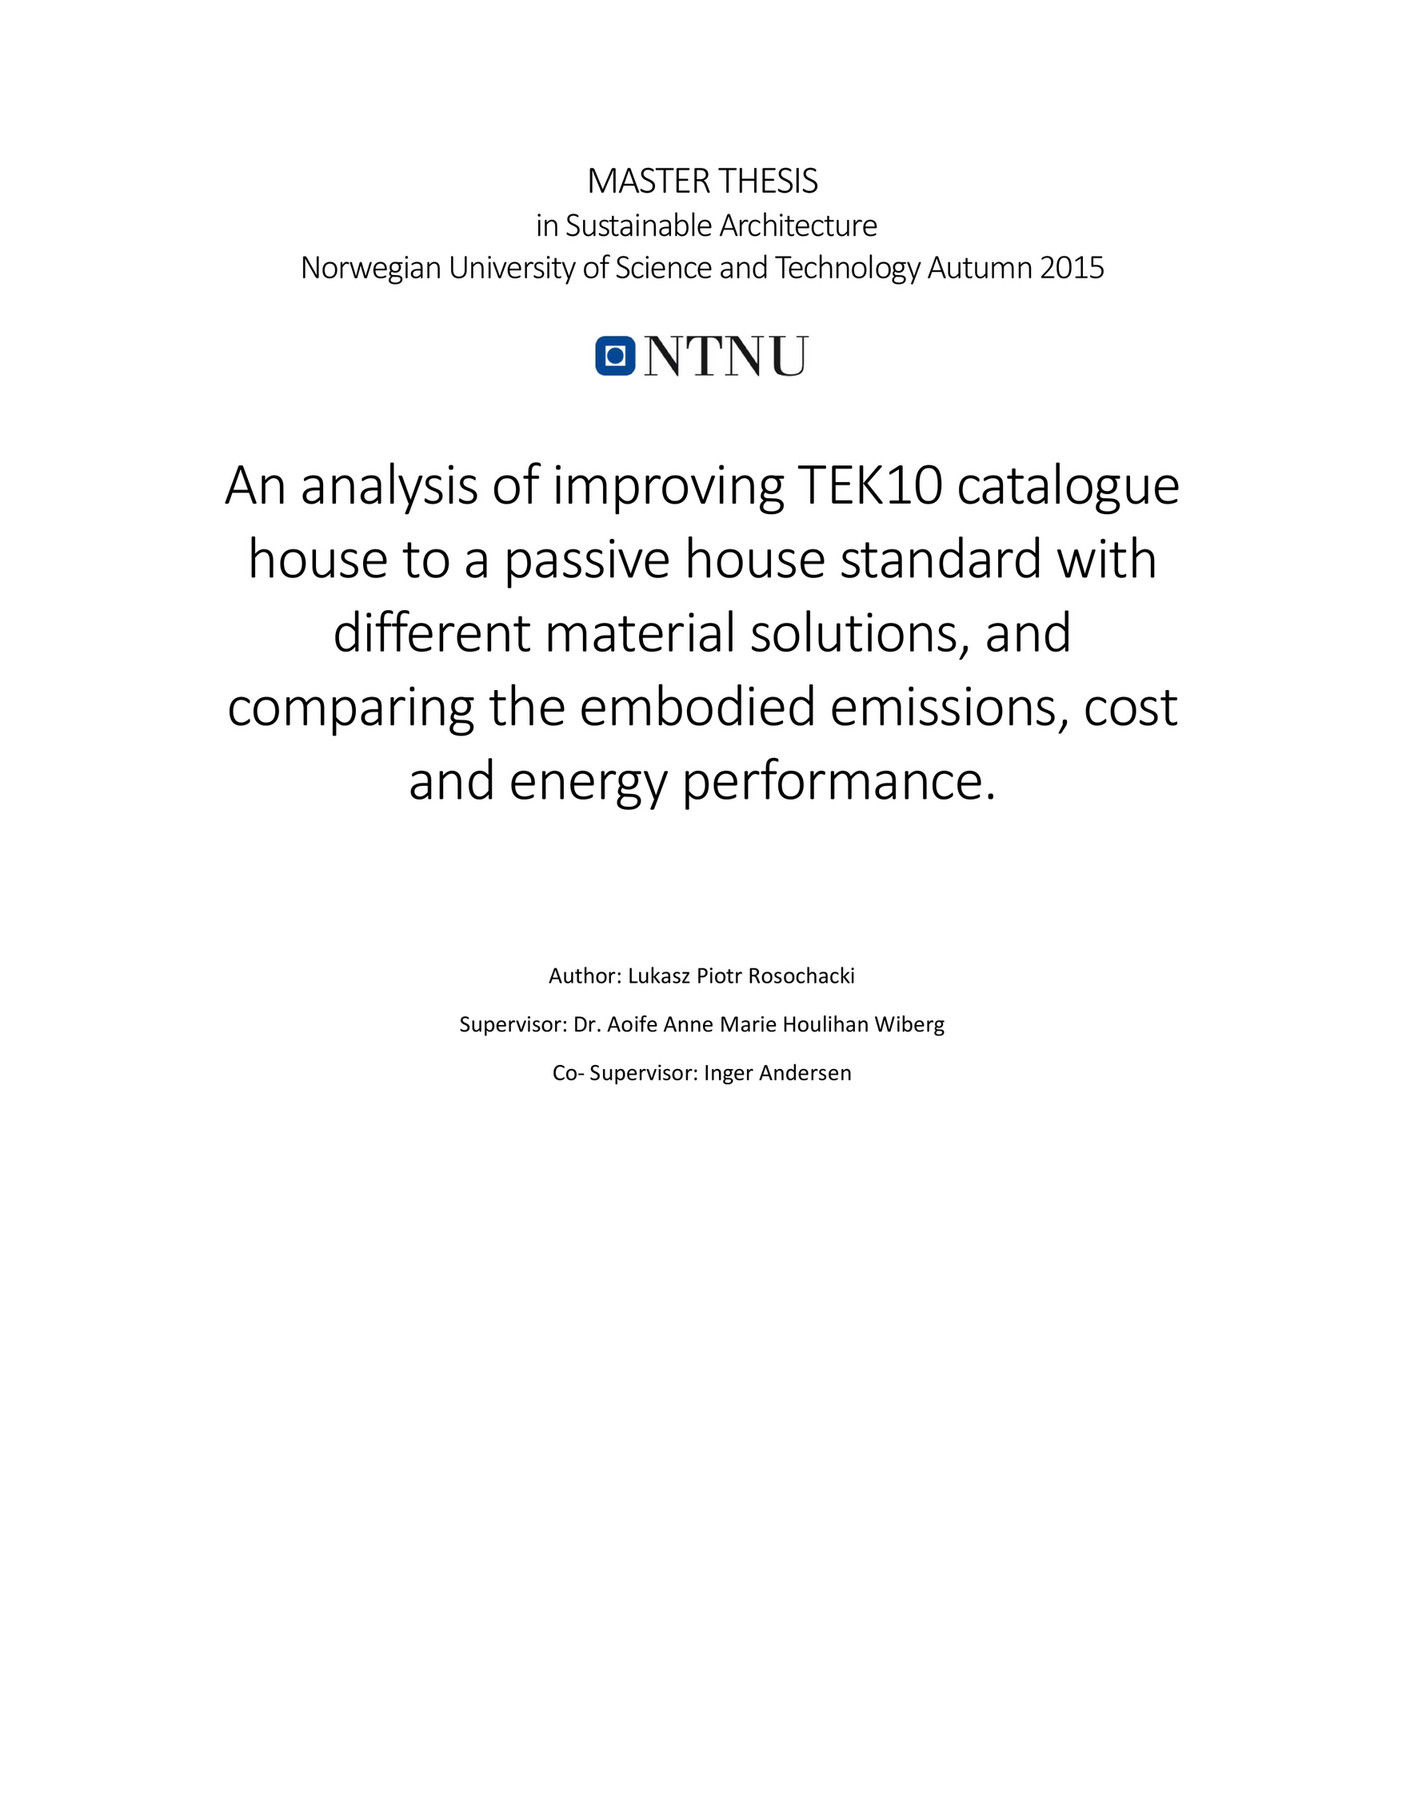 ntnu master thesis guidelines